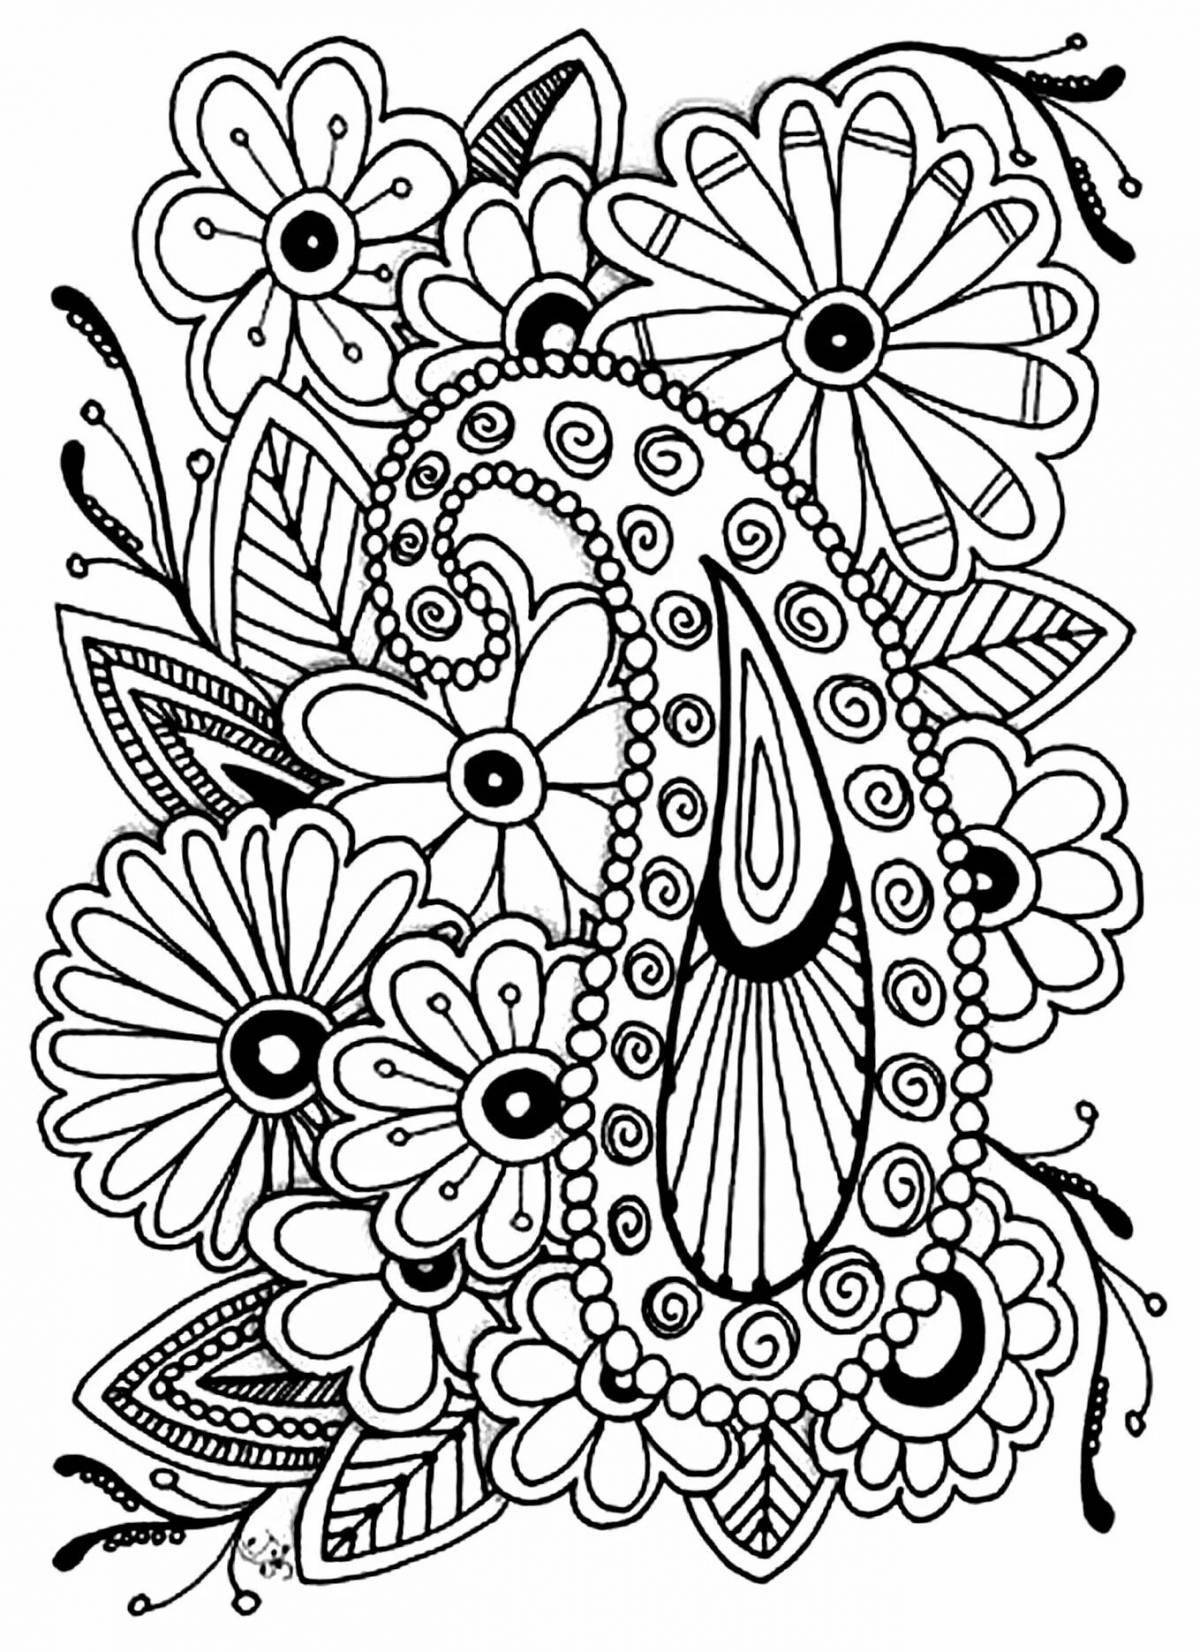 Creative coloring with a pattern